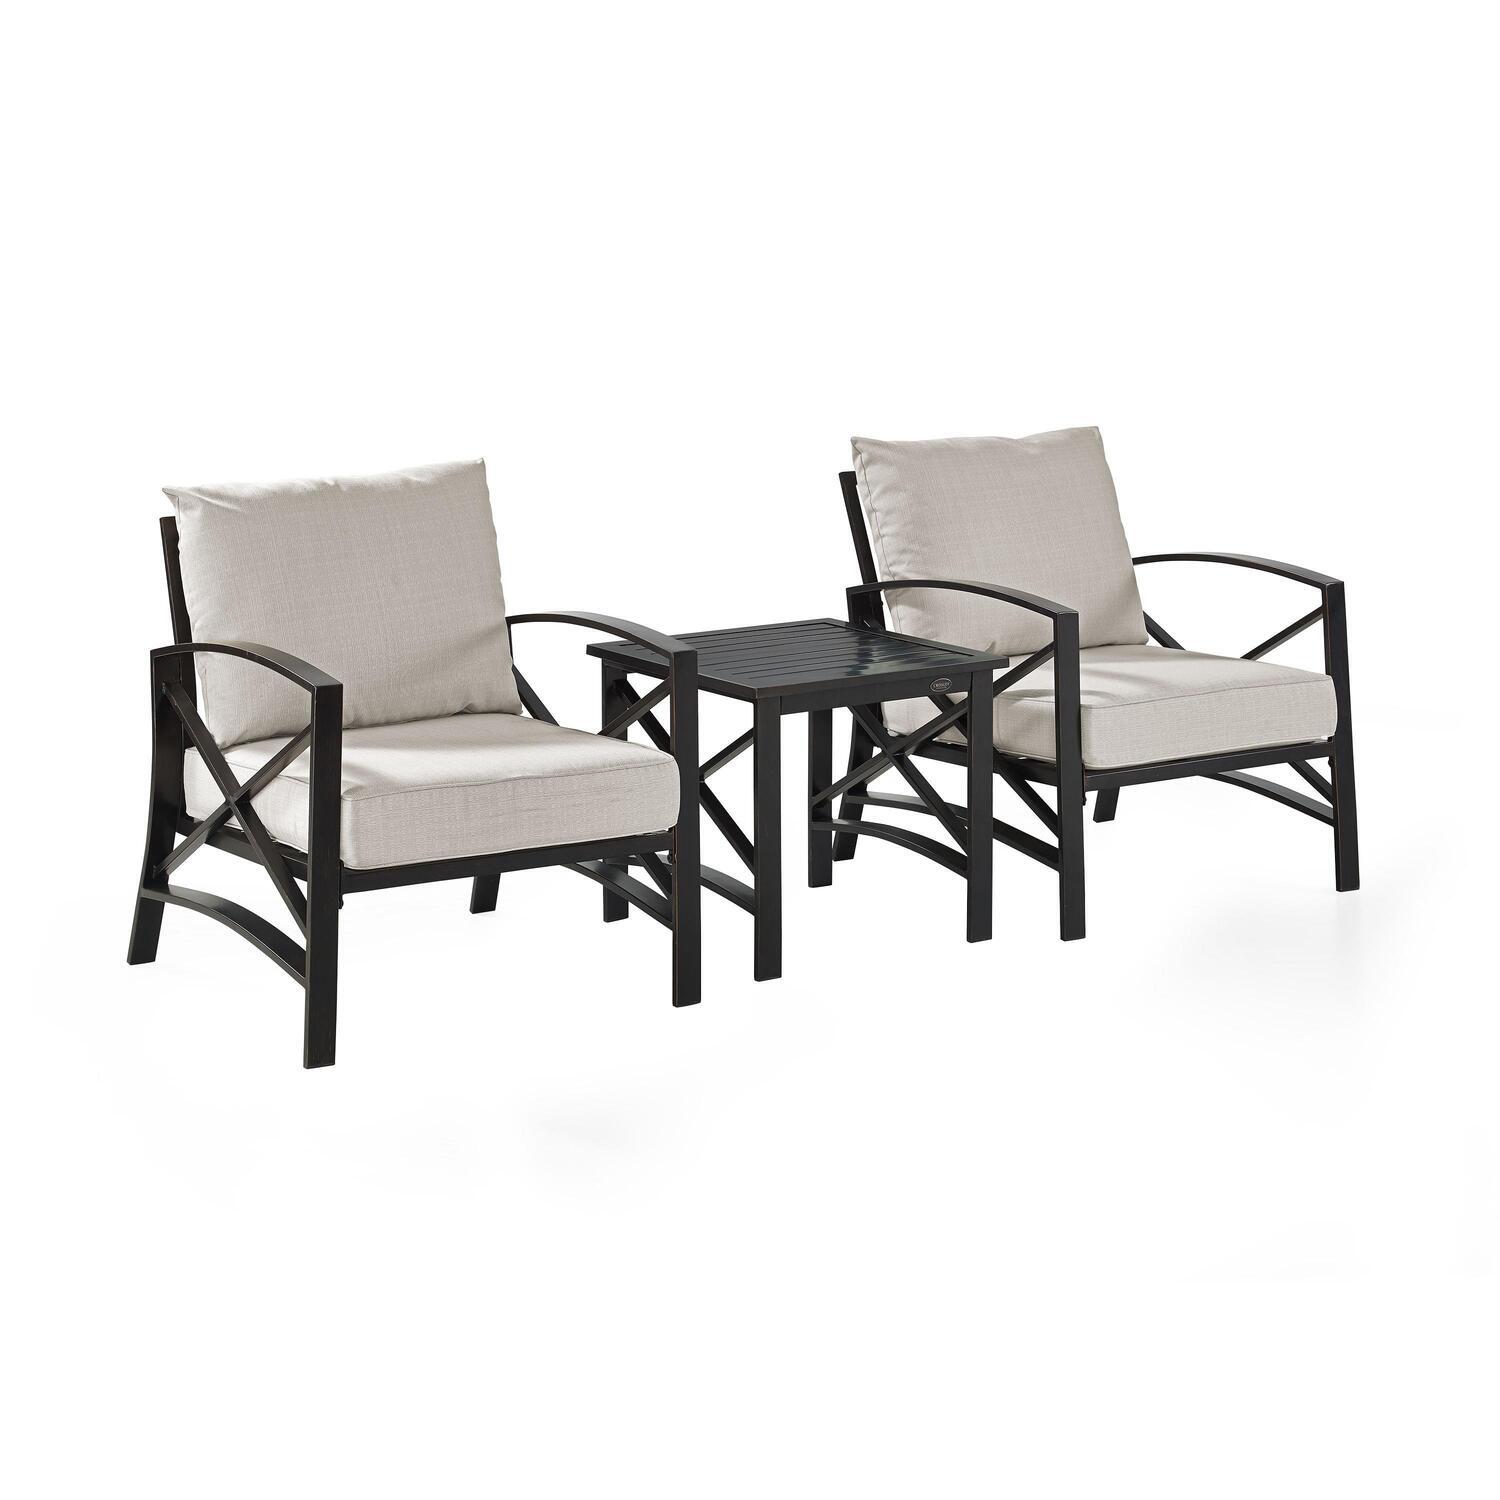 Crosley Furniture Kaplan 3 Pc Outdoor Seating Set With Oatmeal Cushion - Two Chairs, Side Table - image 1 of 8